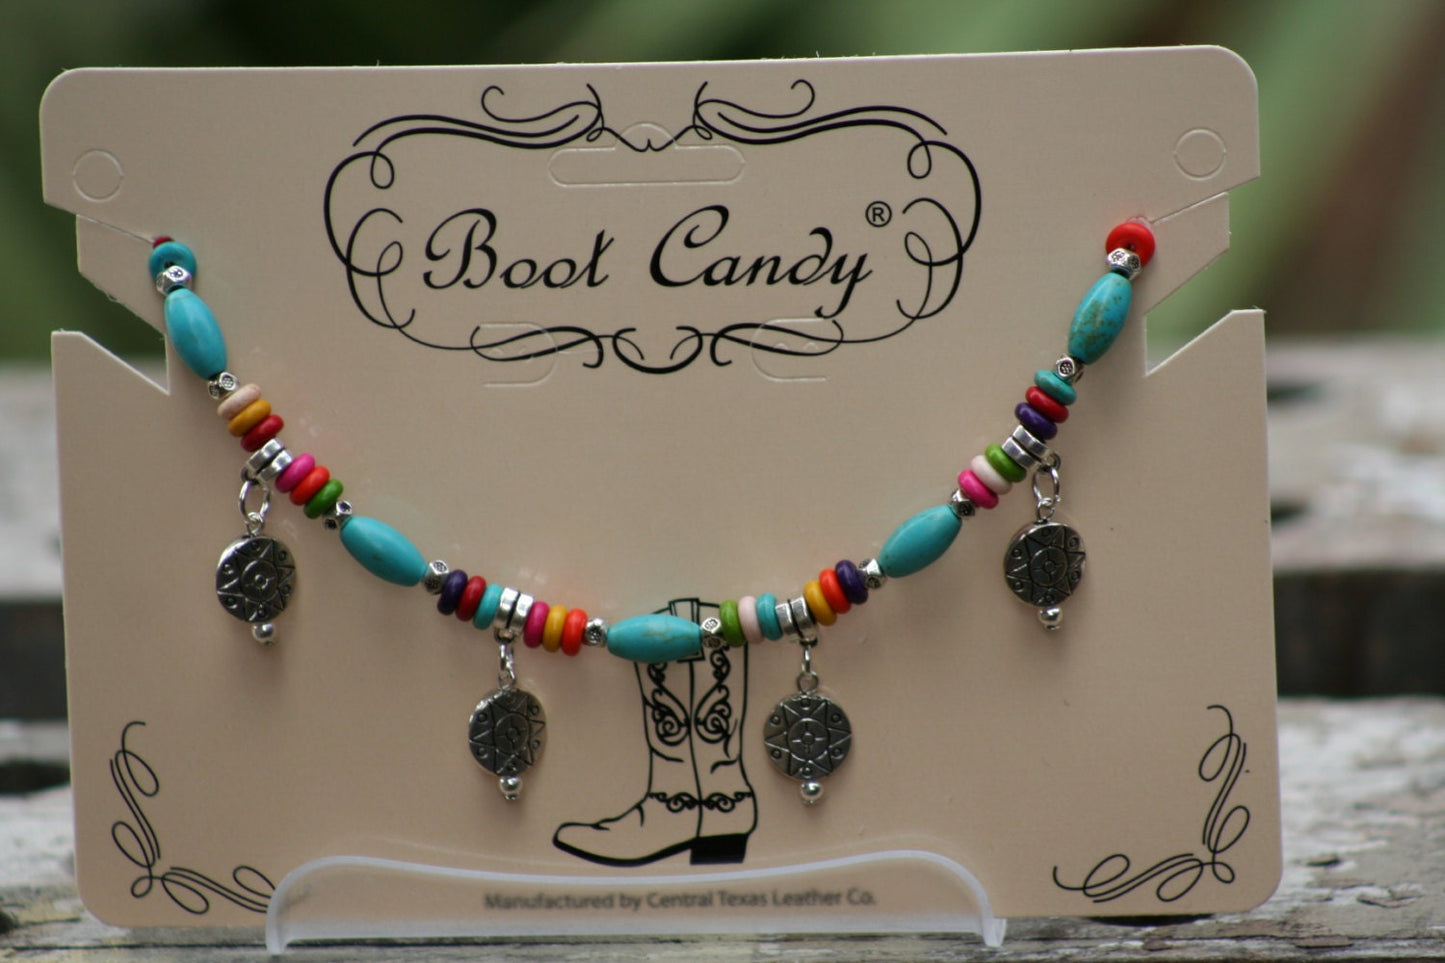 Boot Candy Aztec Inflienced Design Turquoise Beads with Medallions and Multi Colored Accents.